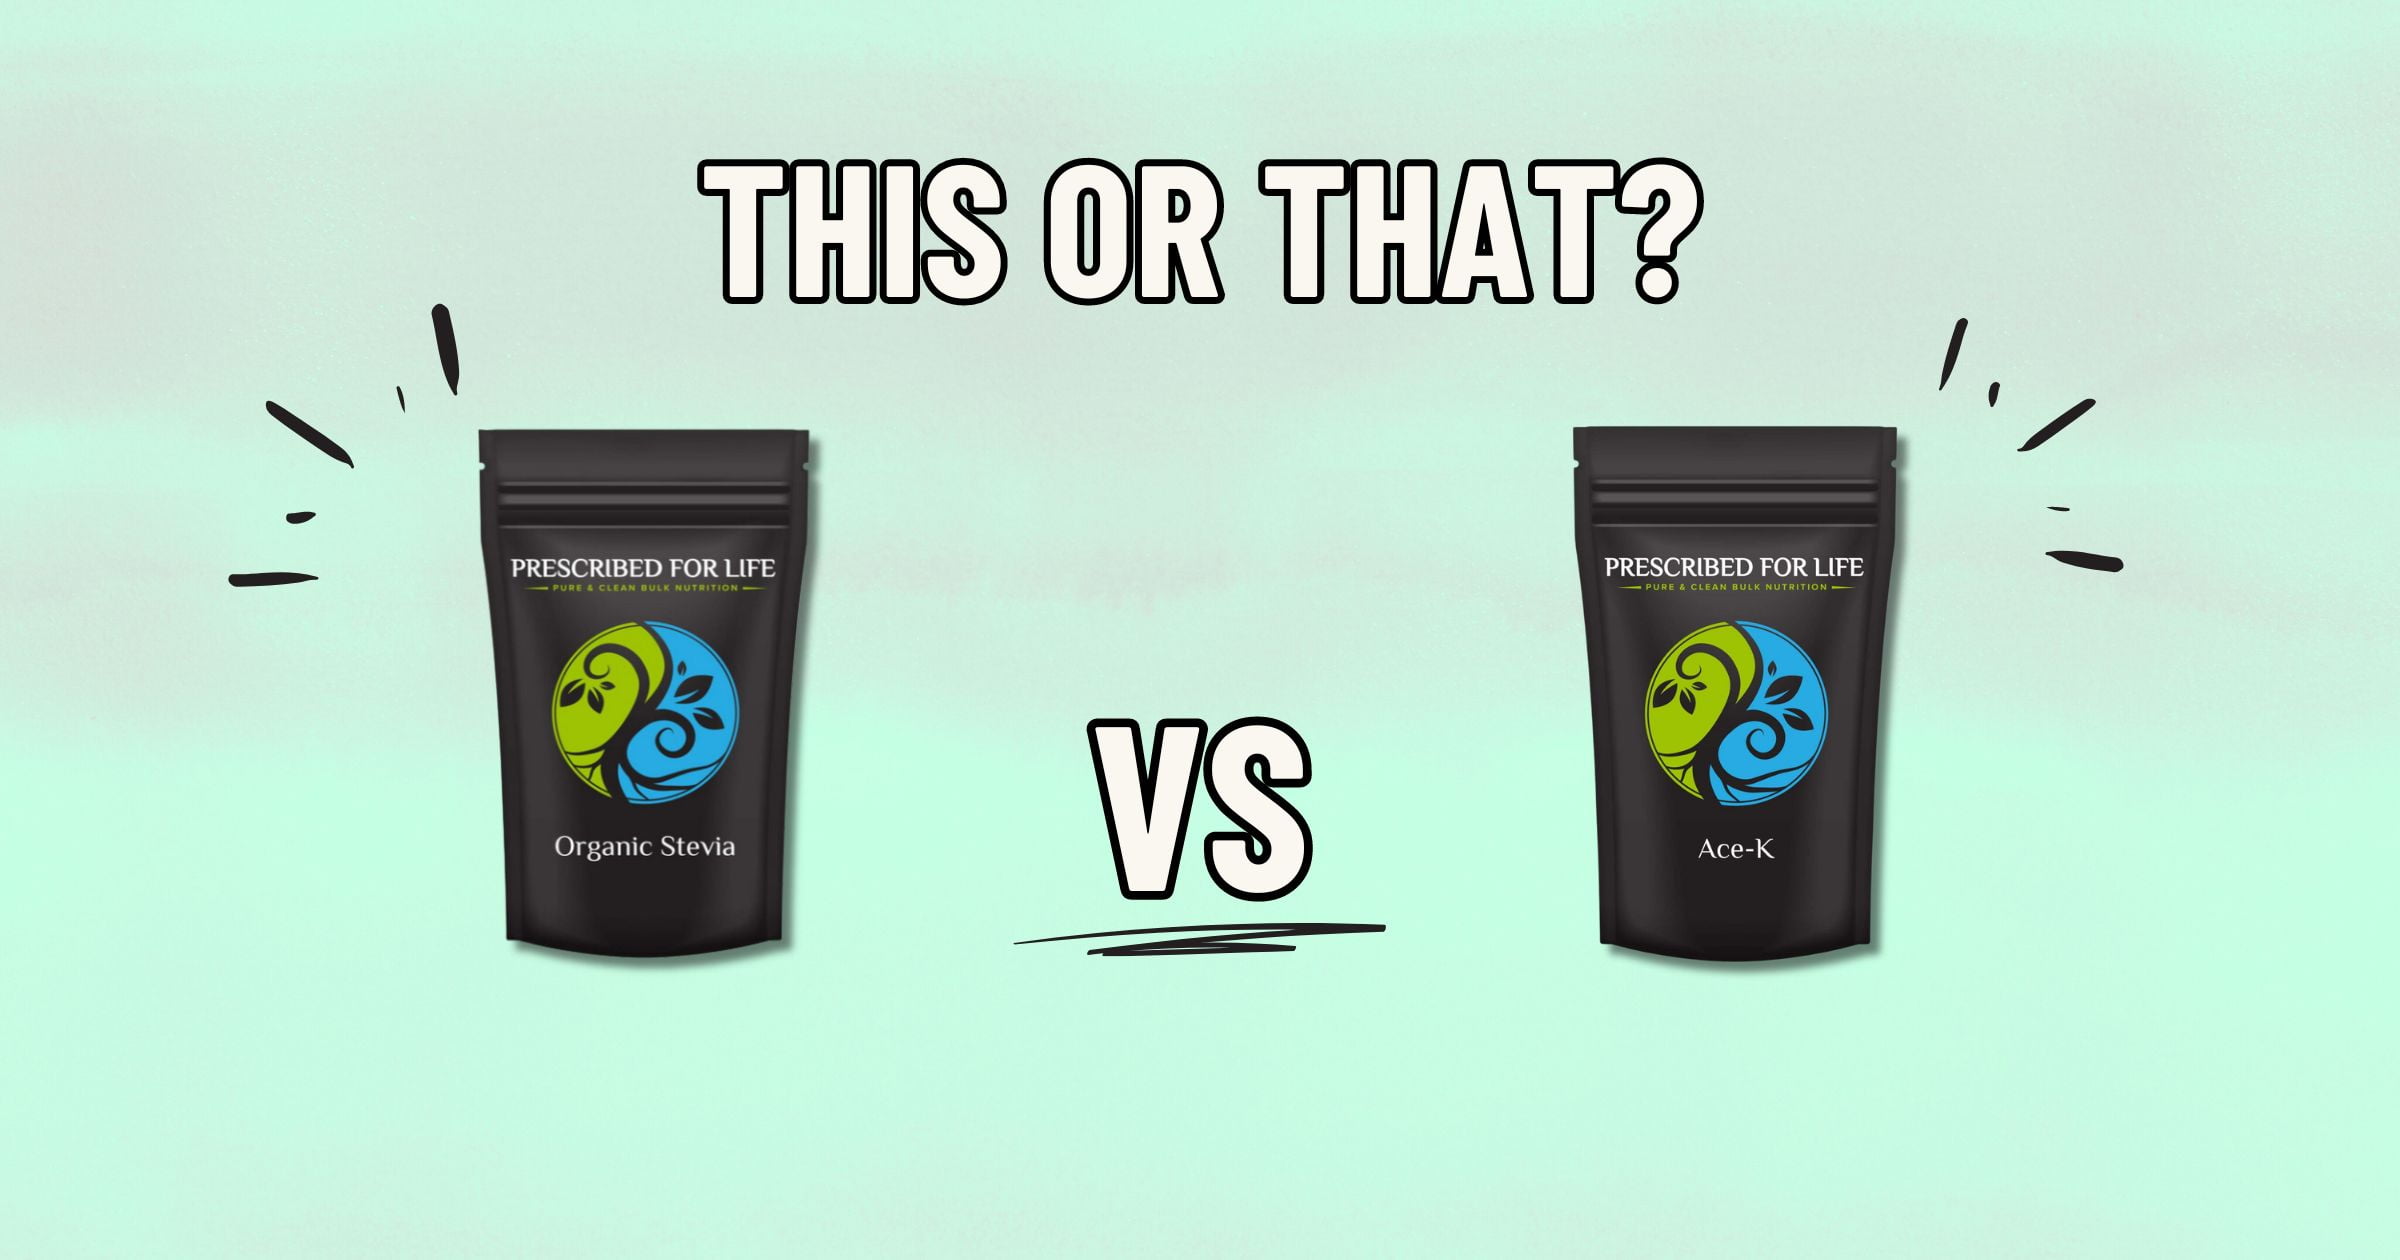 A comparison image titled "This or That?" featuring two Prescribed For Life products. The left product is labeled "Organic Stevia" and the right product, "Ace-K" (Acesulfame Potassium). The items are displayed against a light green background with the word "VS" between them, highlighting your healthier sweetener choices.